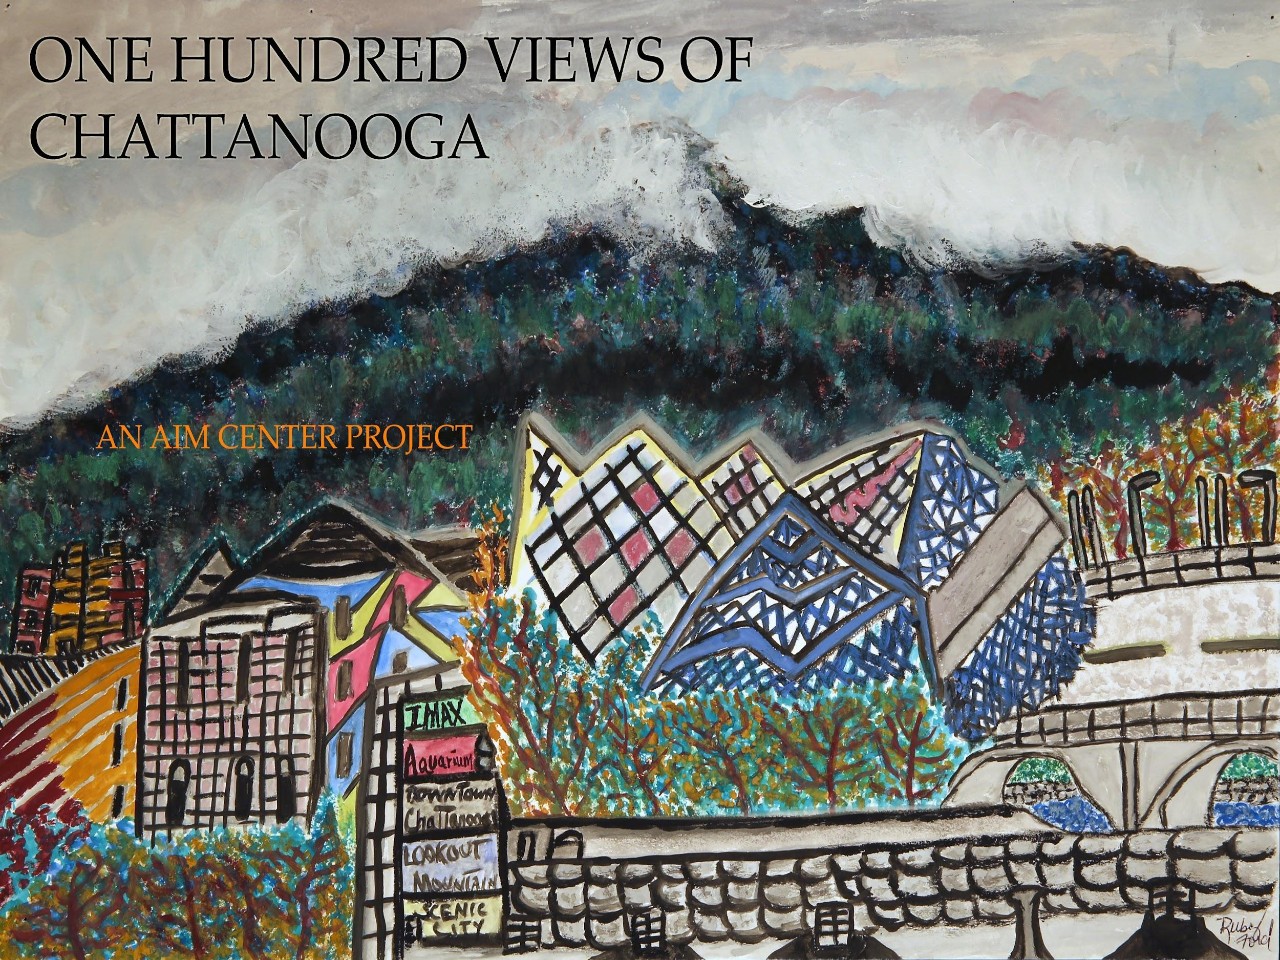 4.	Cover of "One Hundred Views of Chattanooga" coffee table book. Shows the title and a cover painting in oil pastels that shows a city skyline of Chattanooga, with buildings and other structures against a mountainous background of forests